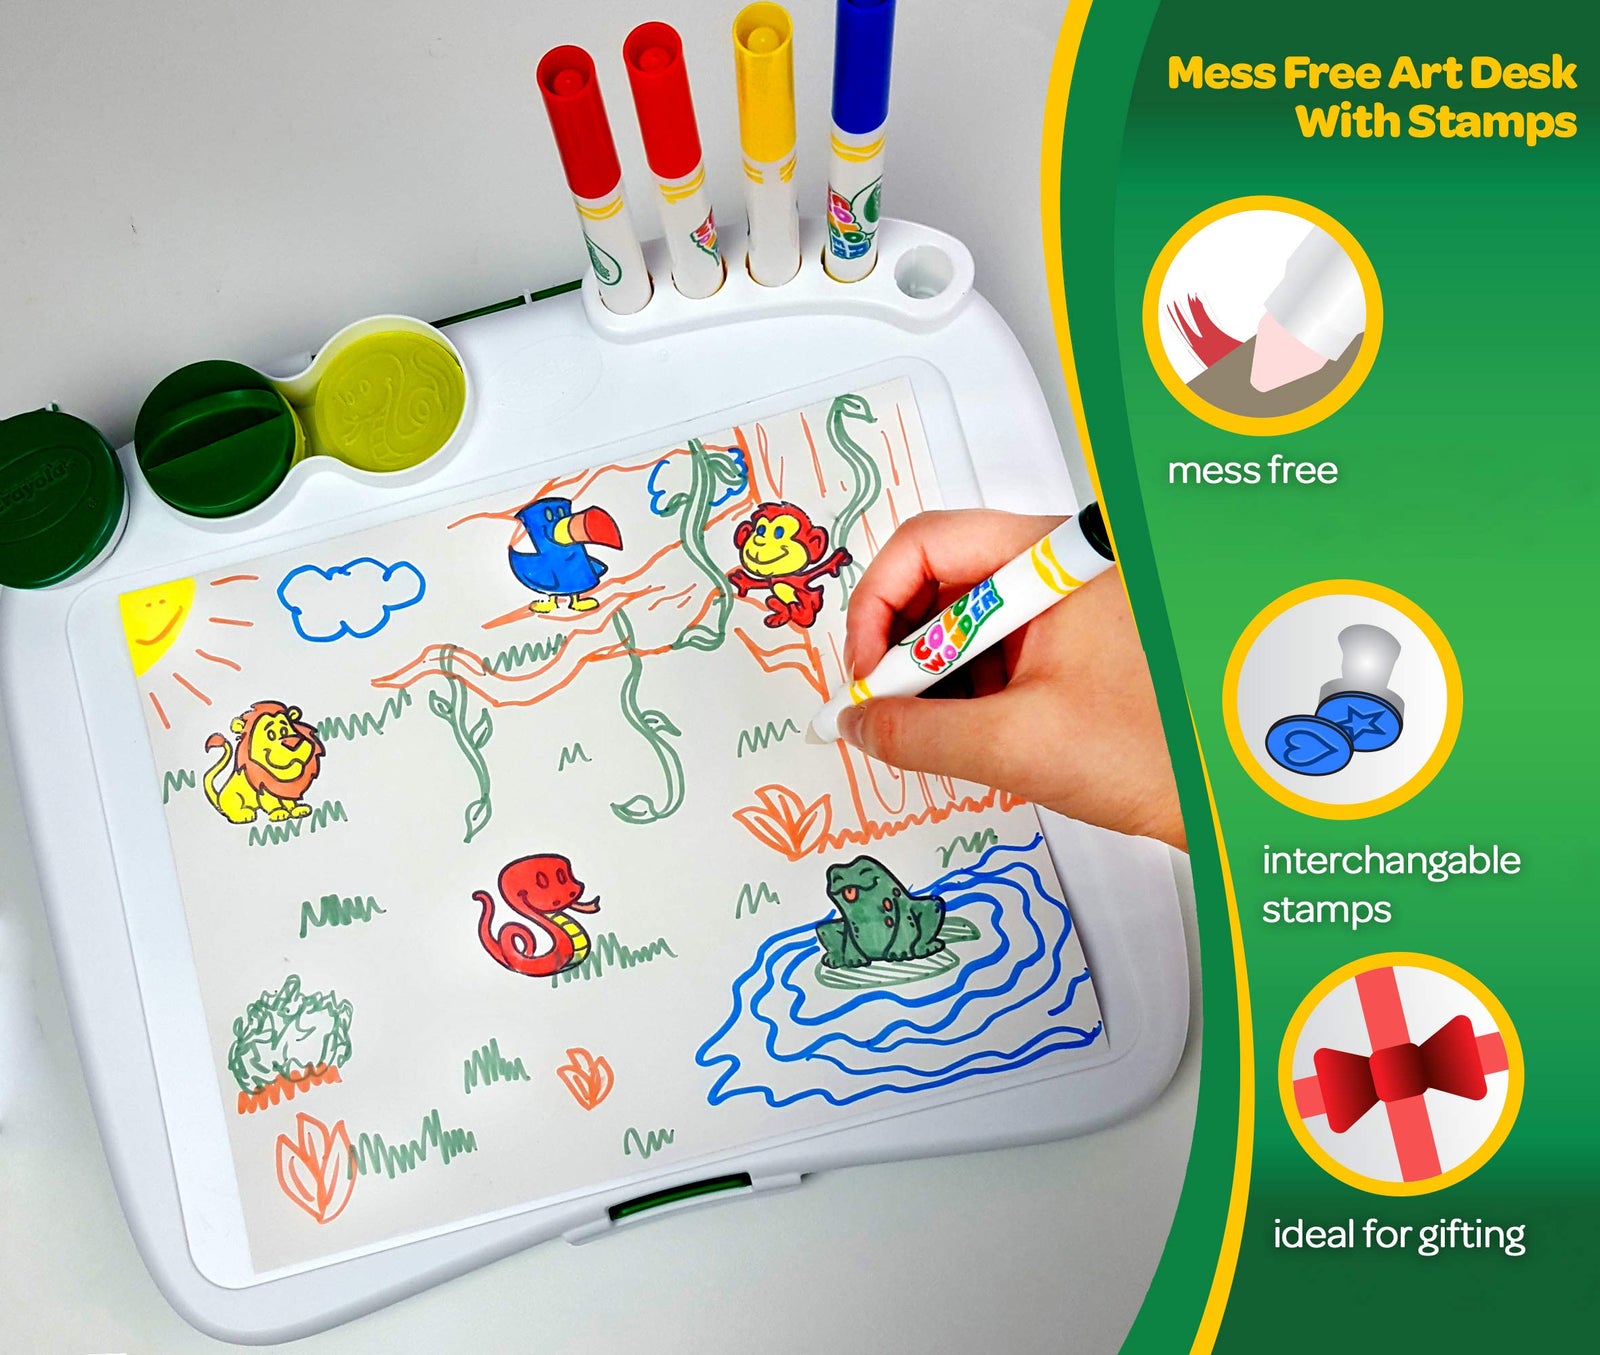 Crayola Color Wonder Mess Free Art Desk with Stamps, 20+ Pieces, Kids Toys